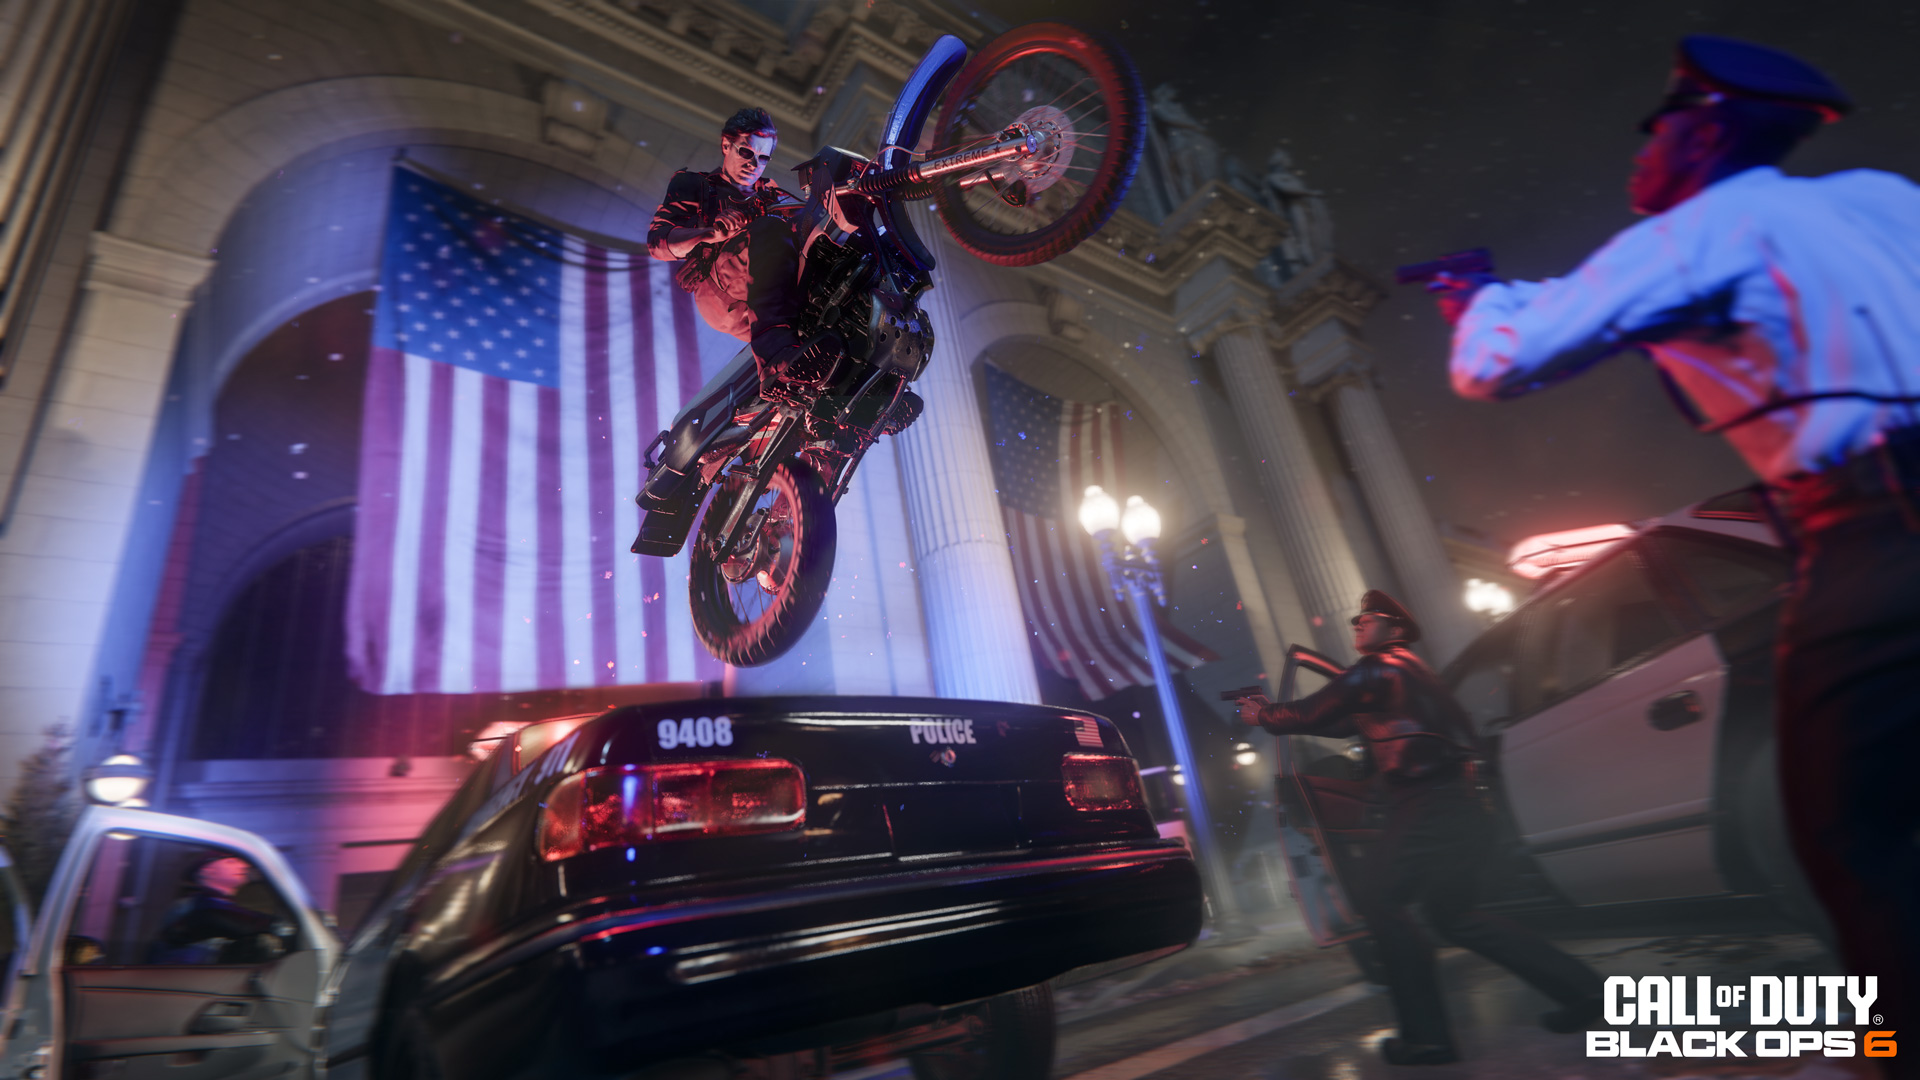 black ops 6 release date - someone rides a motorcycle over officers with an american flag in the background